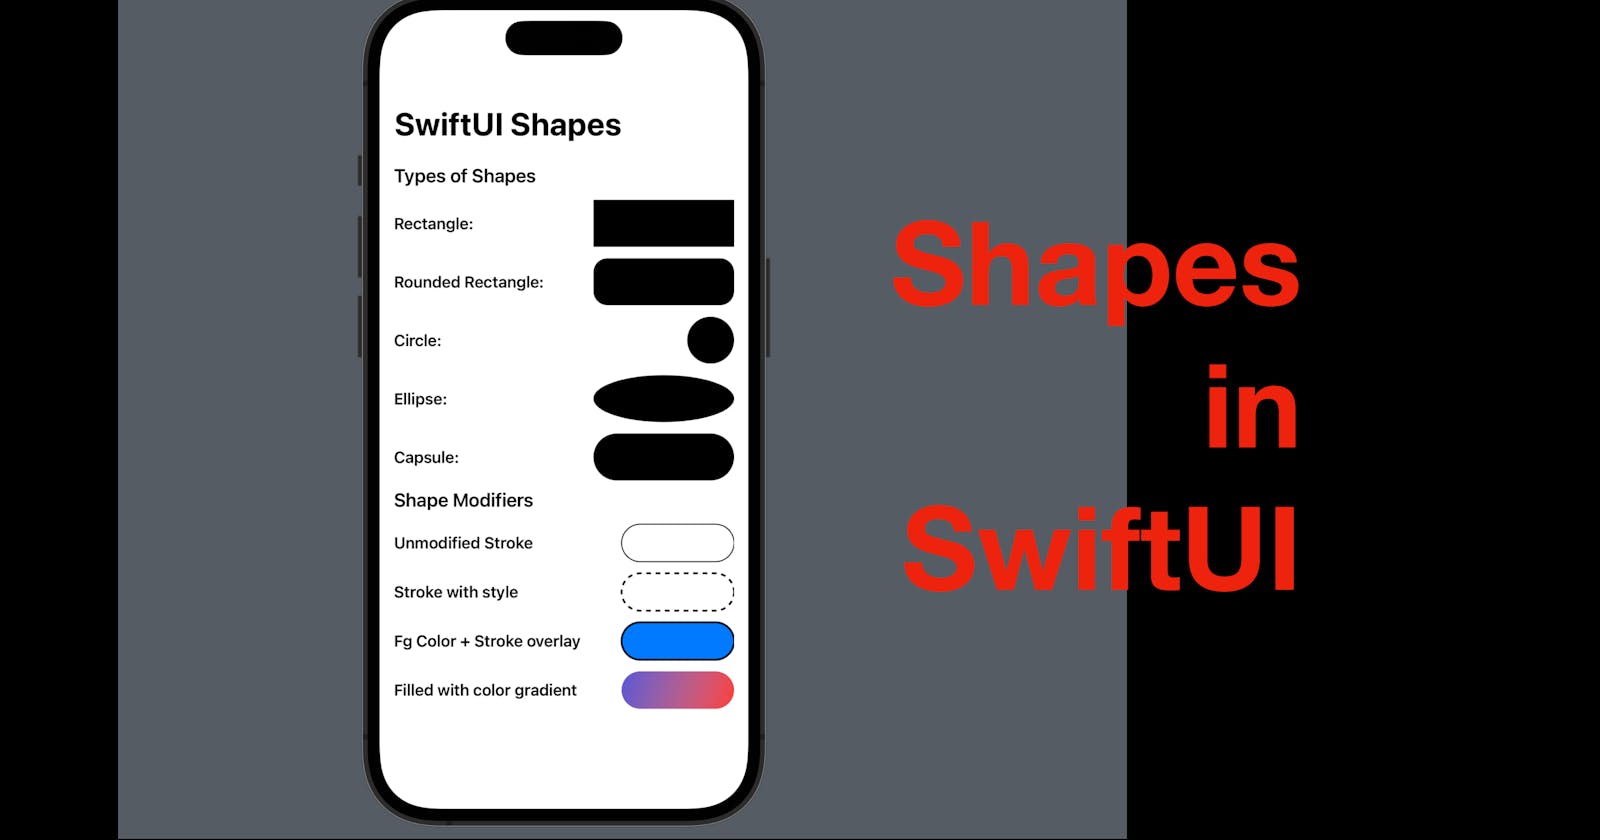 SwiftUI Shapes